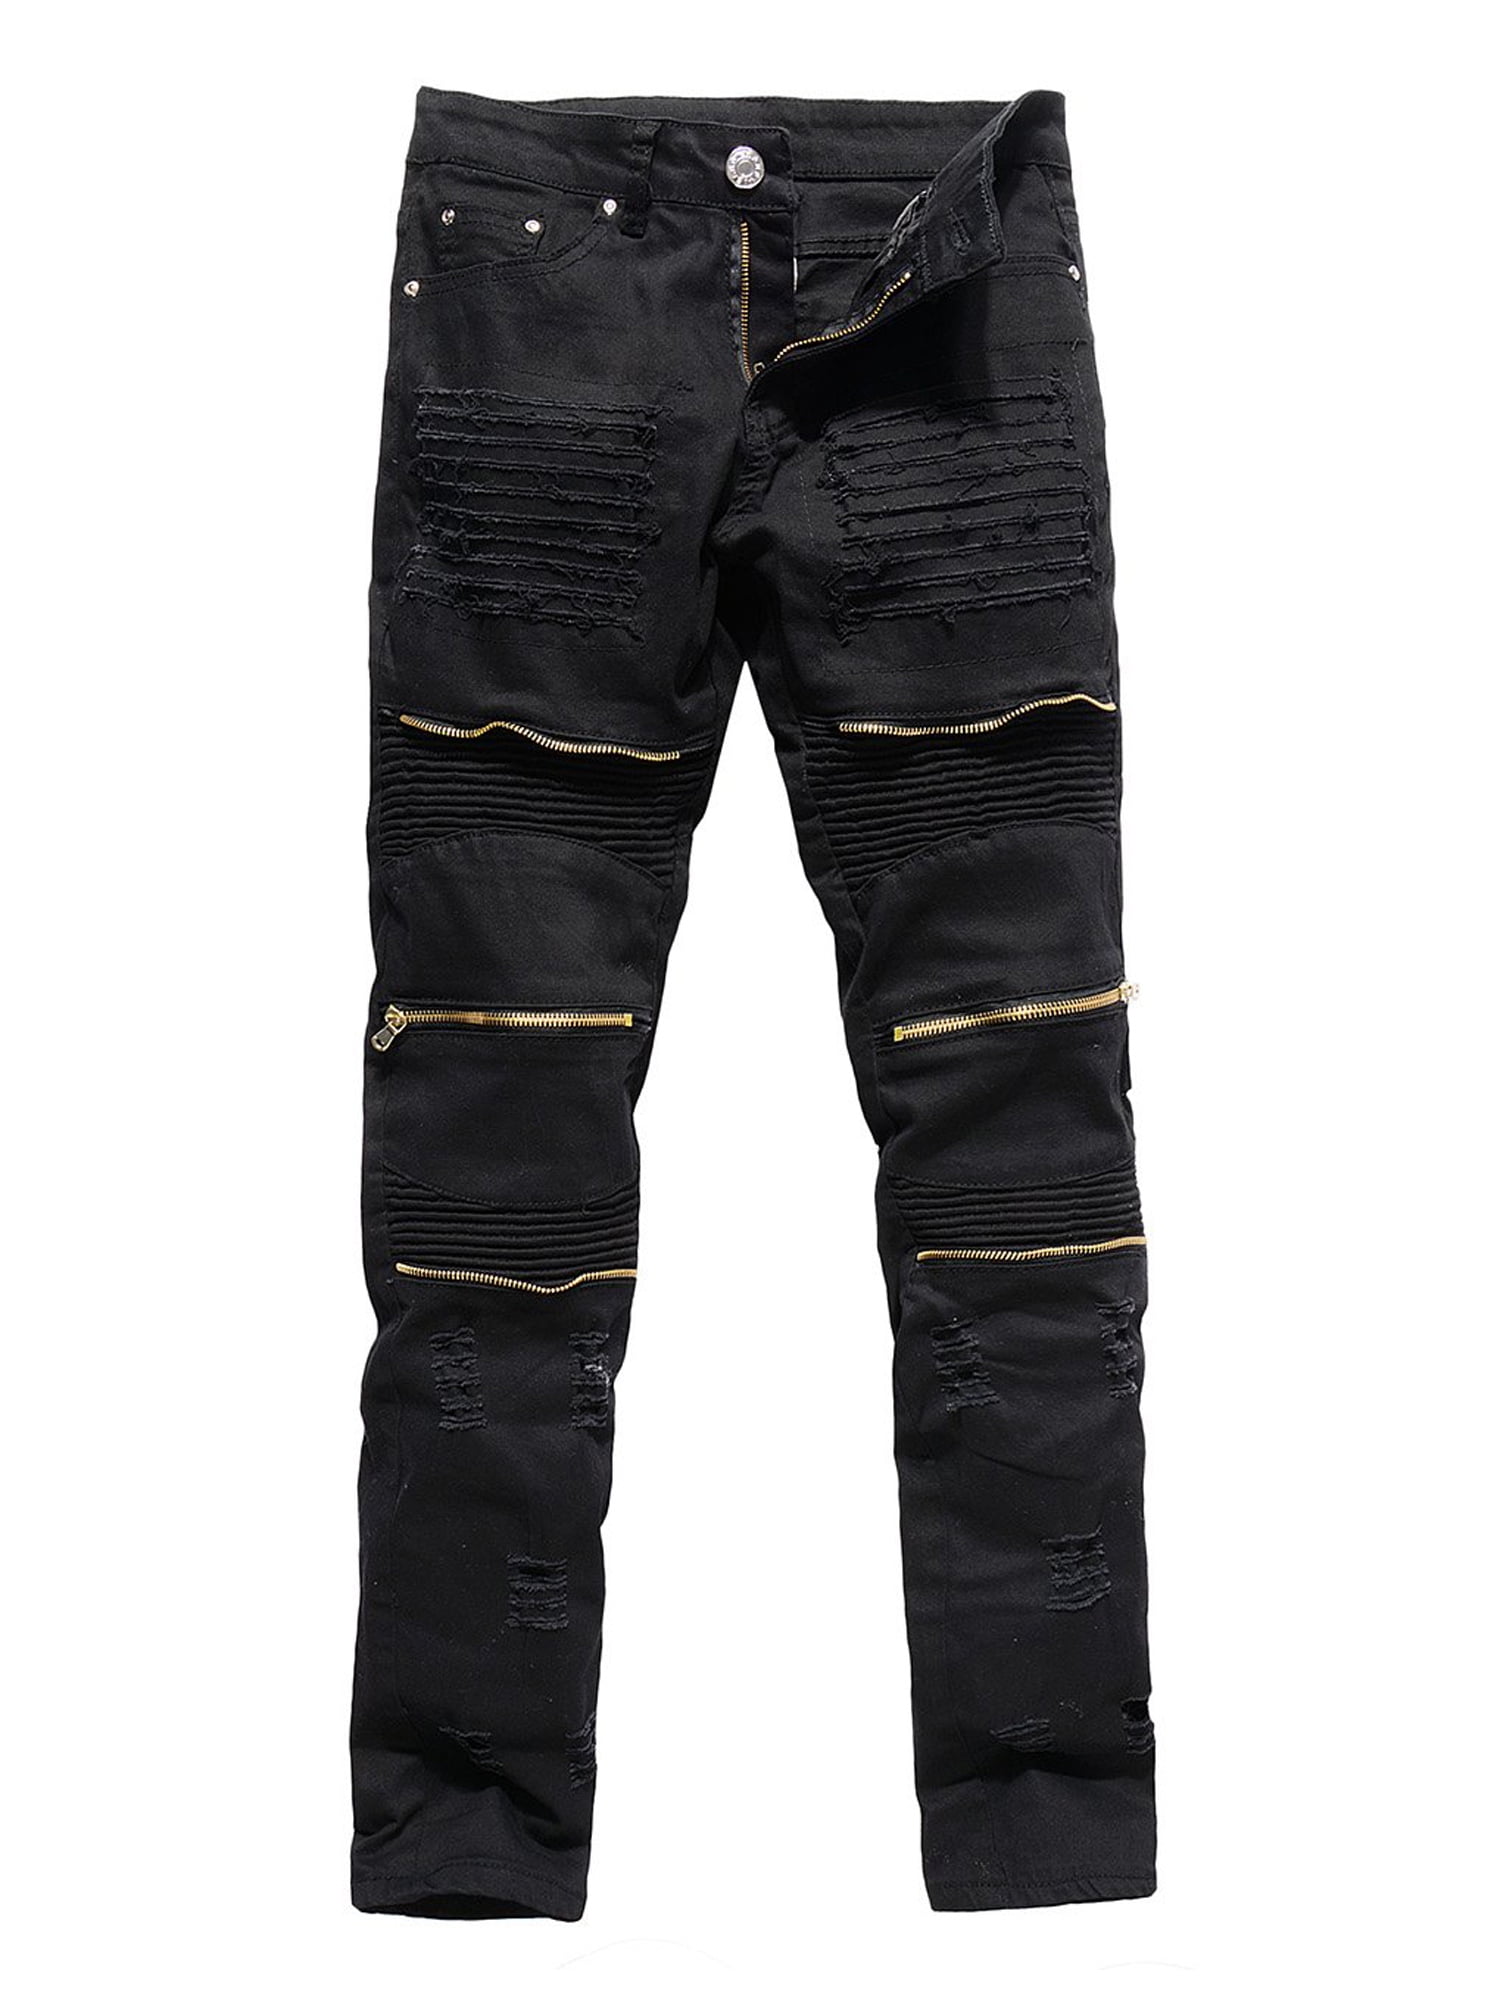 Kehen Mens Skinny Ripped Distressed Destroyed Straight Fit Denim Pants boy Straight Slim Fit Biker Jeans with Zip